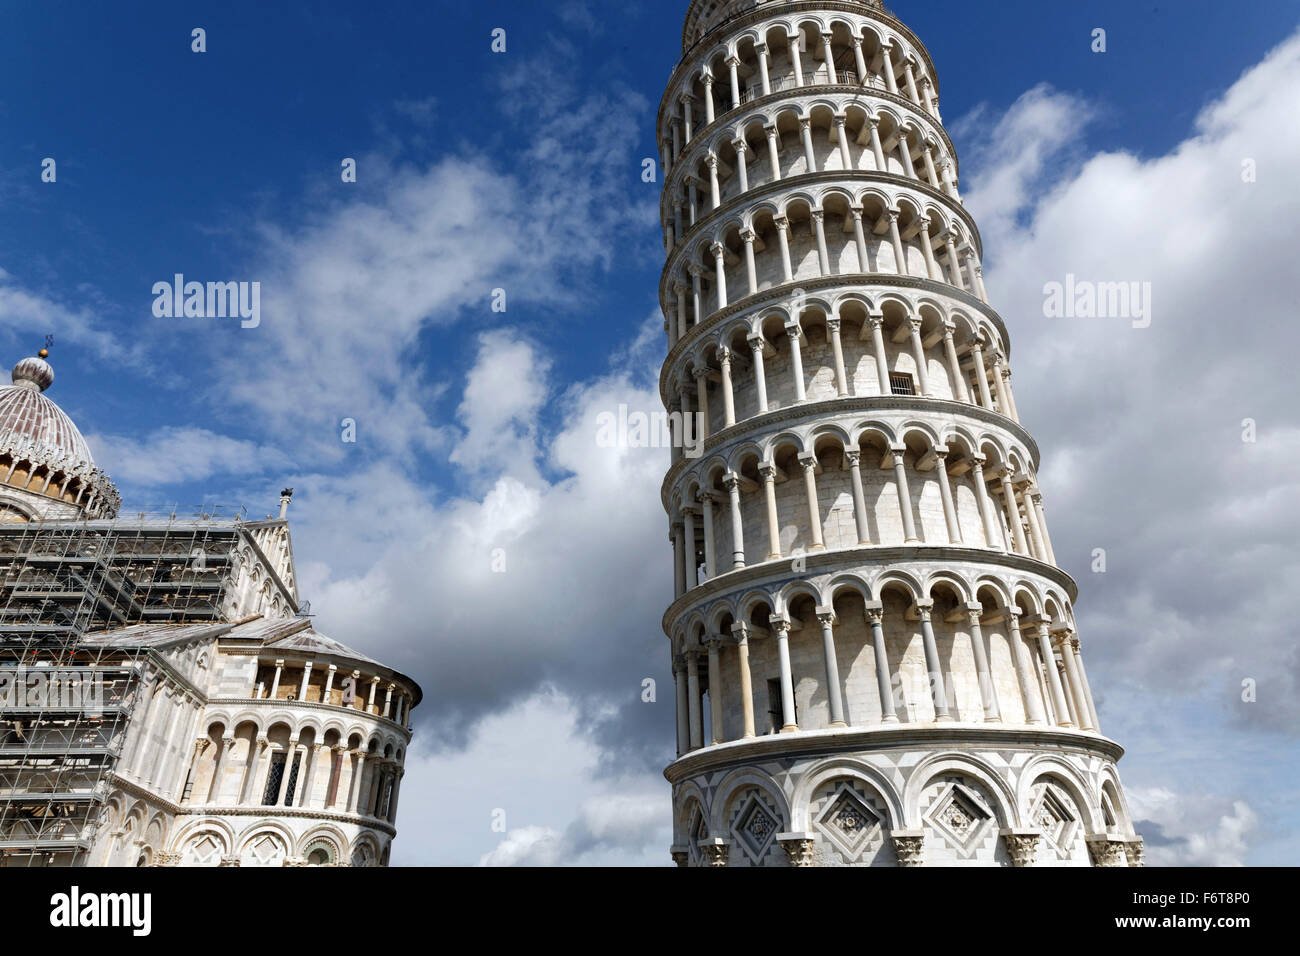 Piazza dei Miracoli, or Square of Miracles features the leaning tower in the Italian city of Pisa. Stock Photo